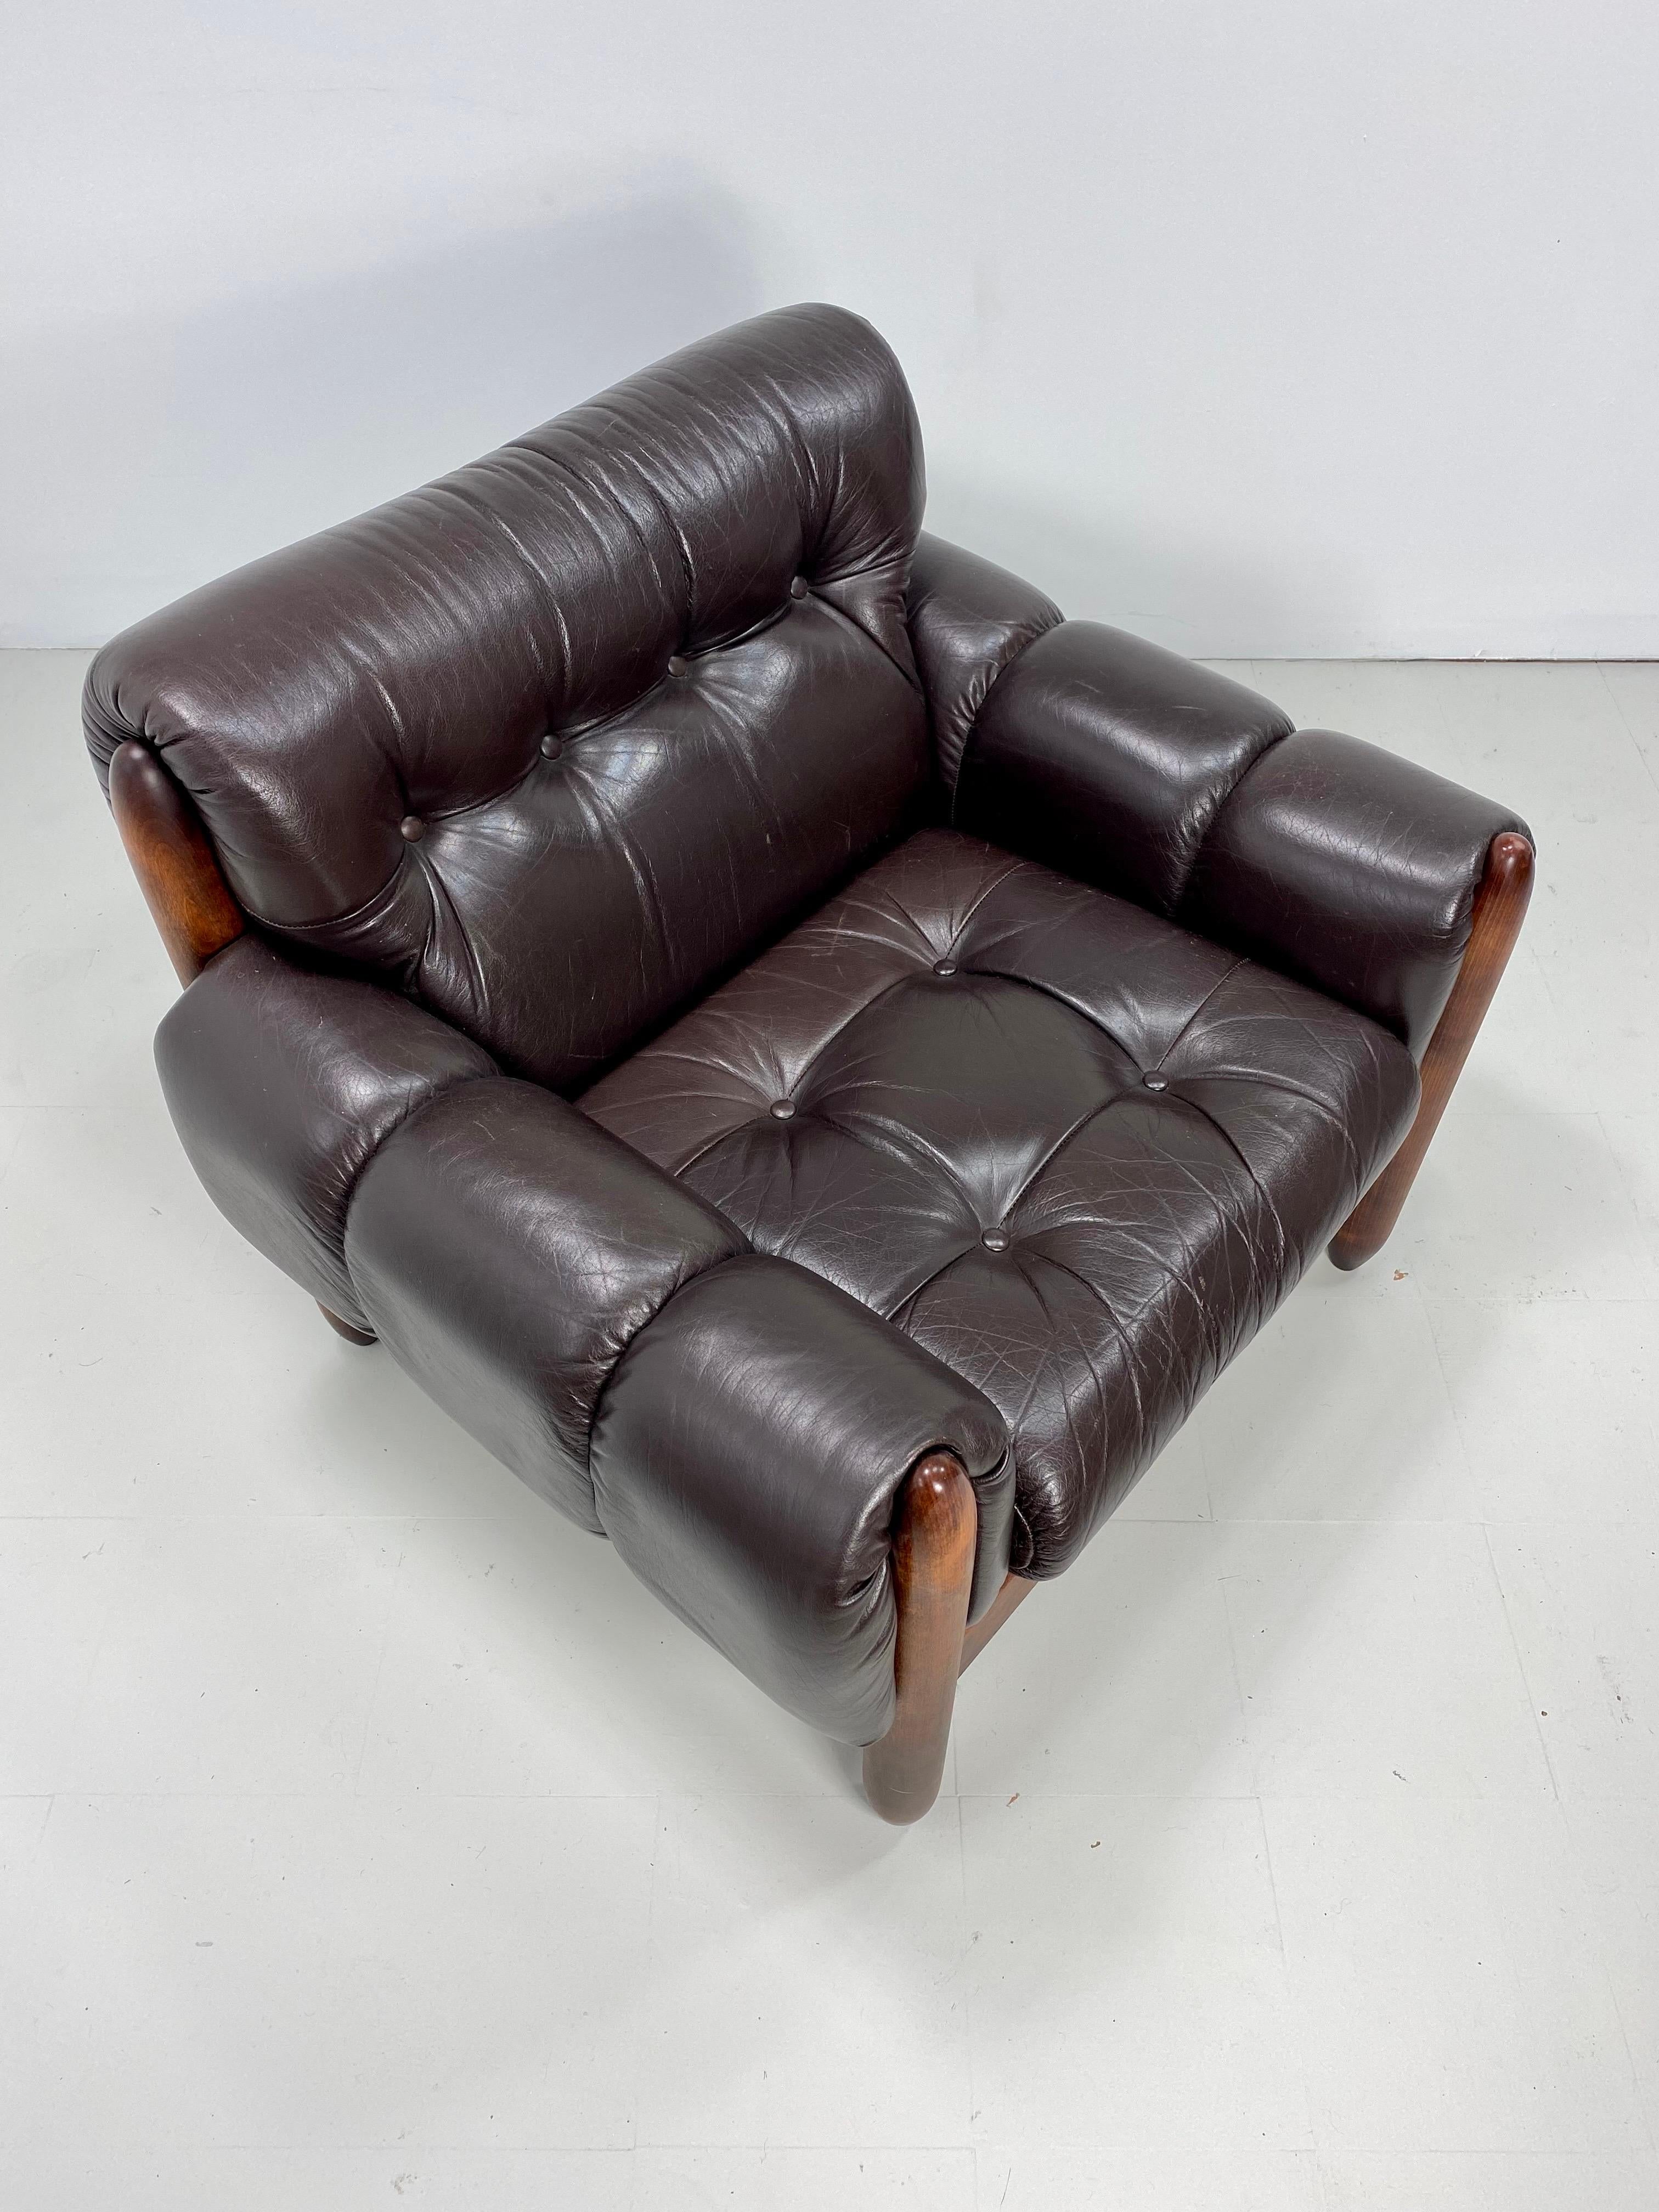 1970s Brazilian lounge chair with sculpted wood frame and button tufted leather upholstery.